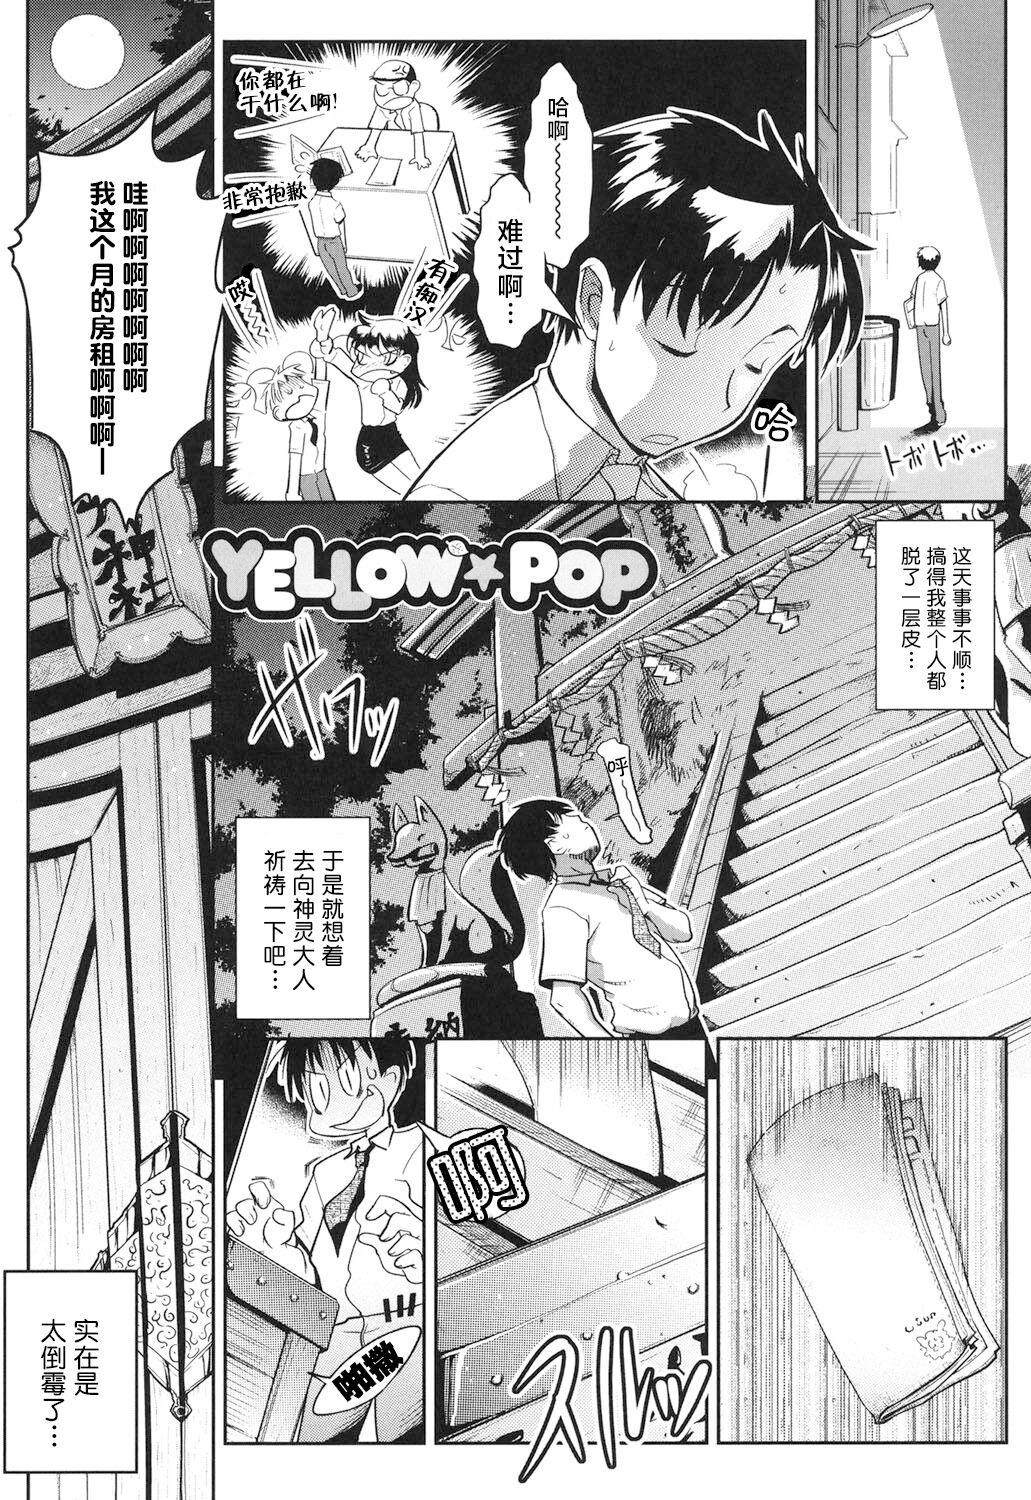 Dicksucking YELLOW★POP Ch. 1 Gaping - Picture 2